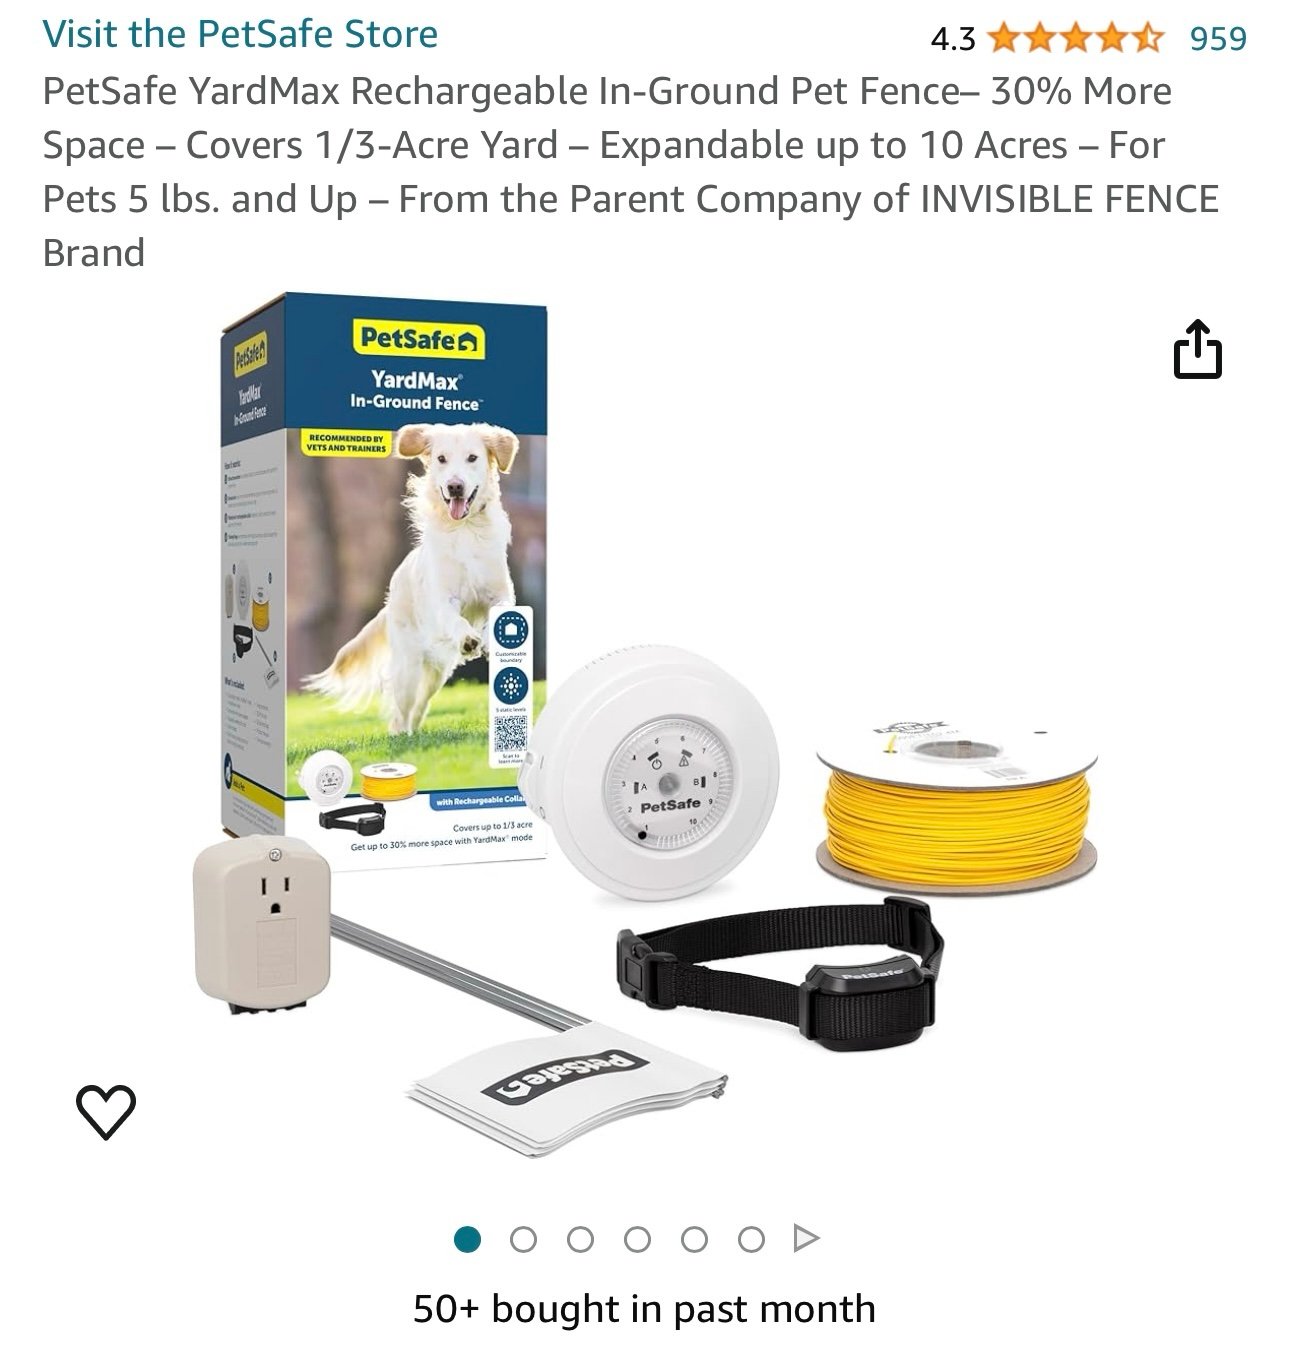 PetSafe YardMax Rechargeable In Ground Pet Fence For Pets 5 Lbs & Up $299 Amazon r813RhMYs